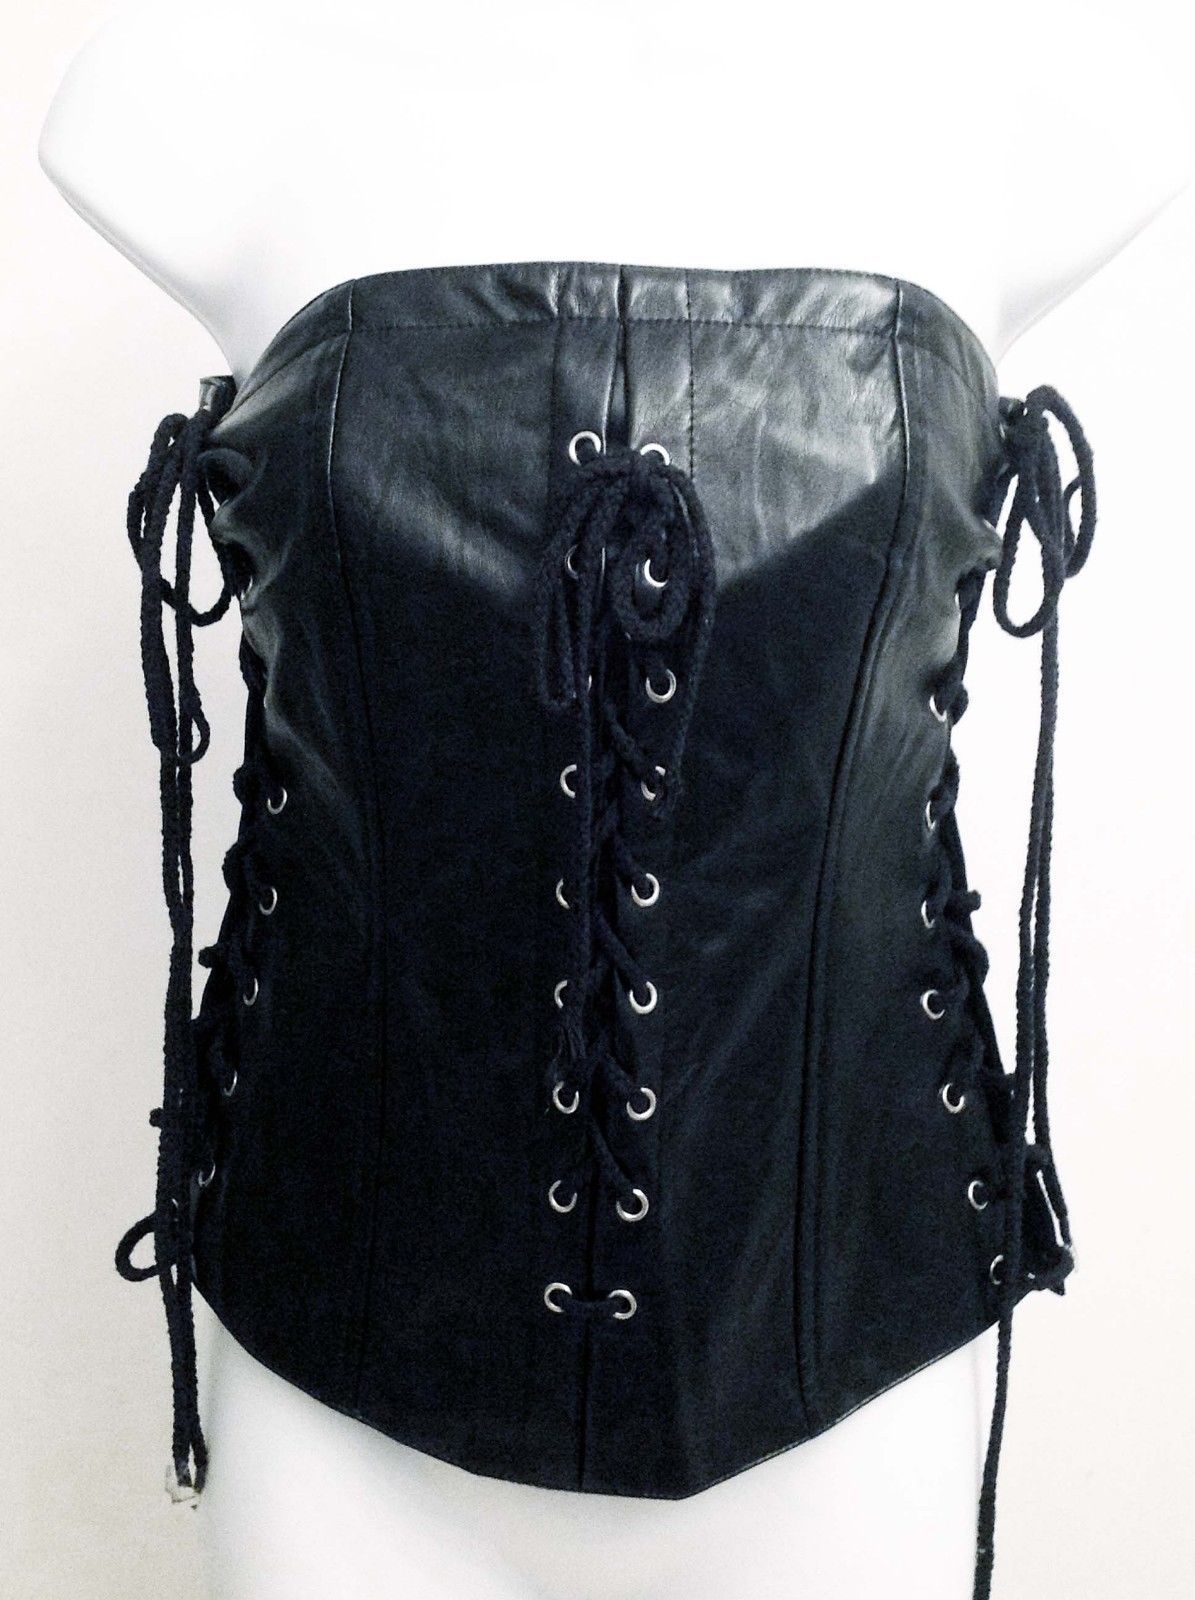 Primary image for Hot Topic Steampunk Goth Rave Punk Visual Kei Fetish Bondage Laced Up Corset Top